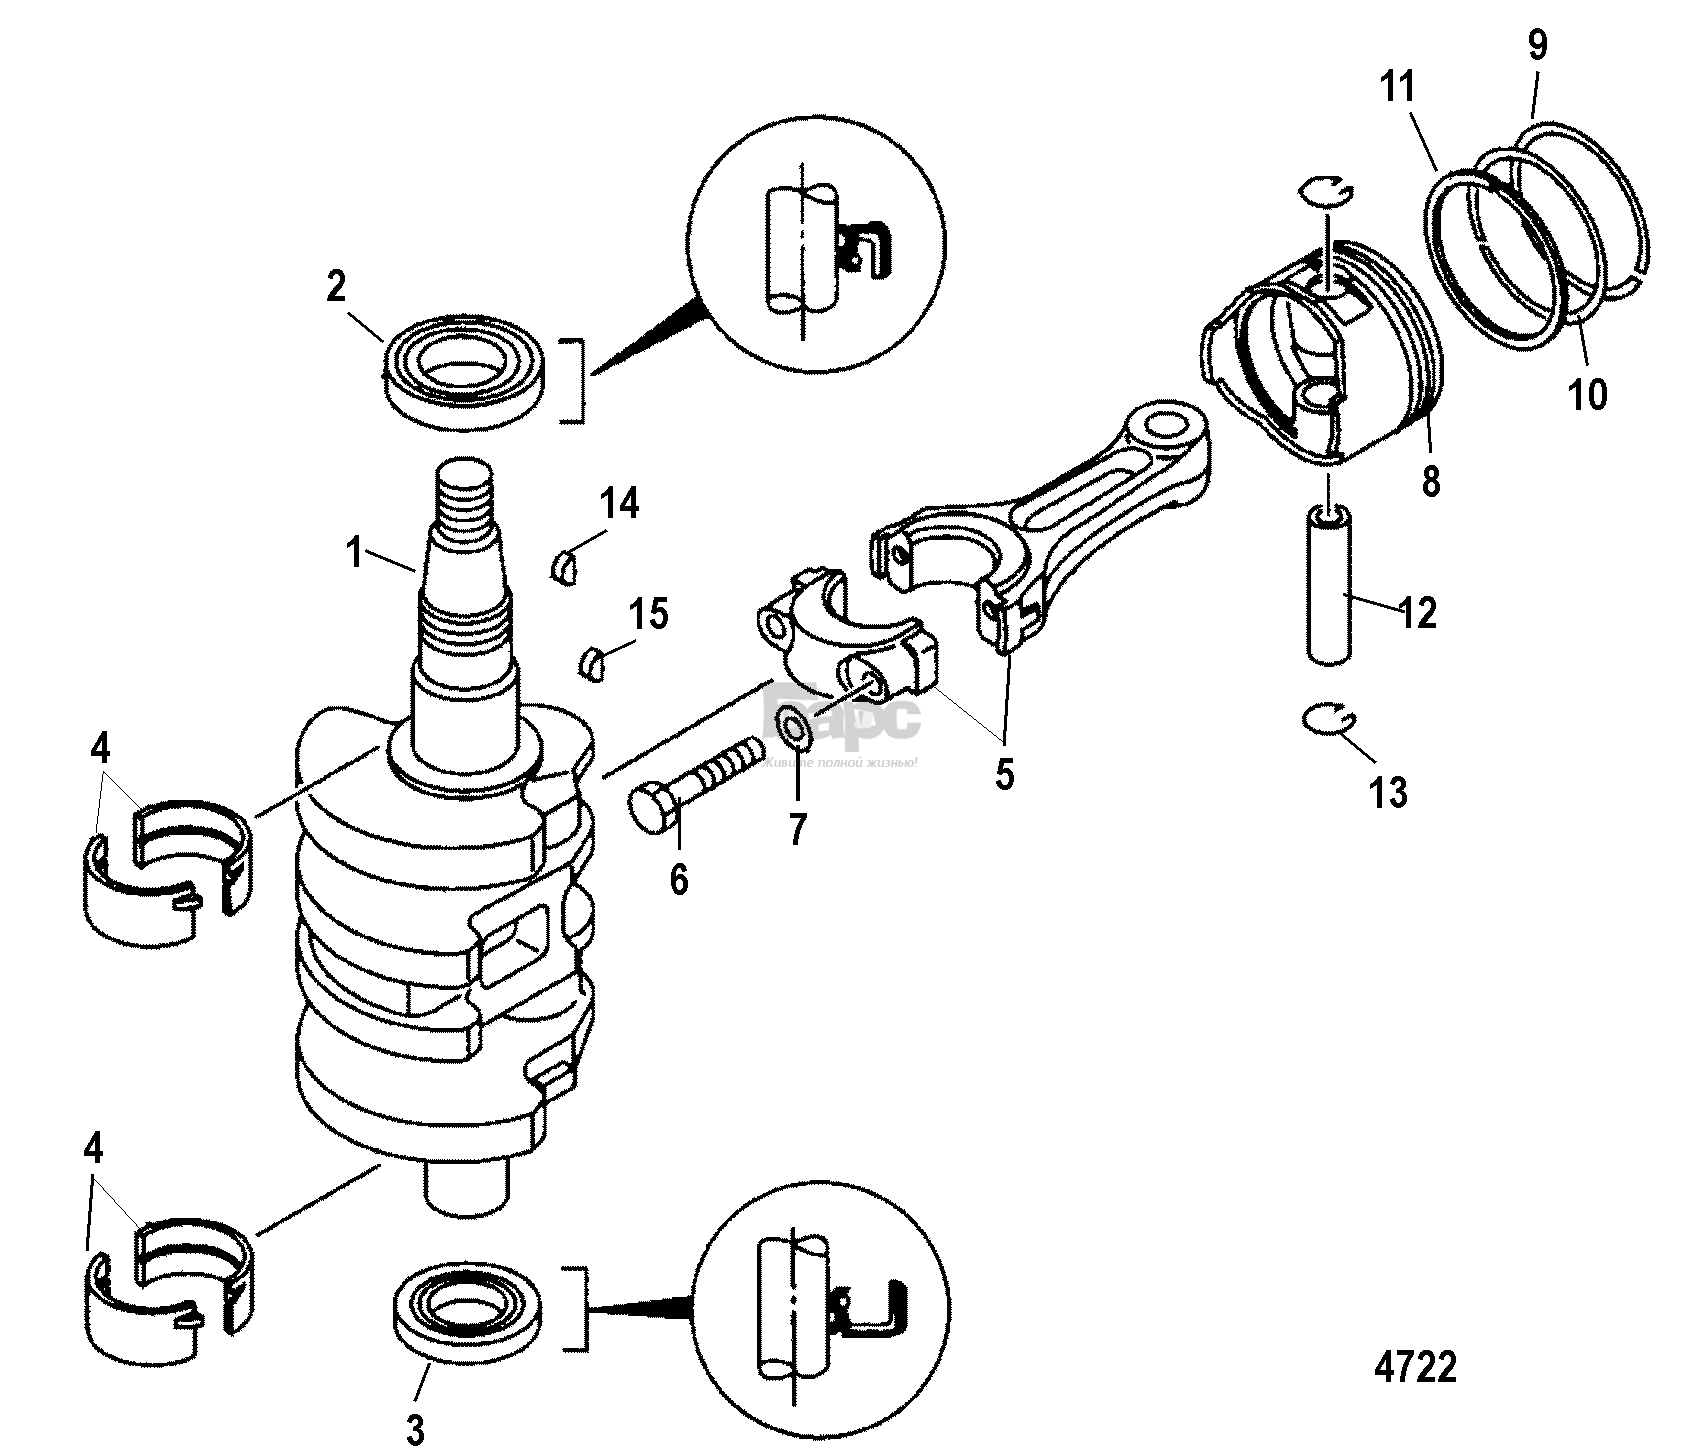 Crankshaft, Pistons, And Connecting Rods